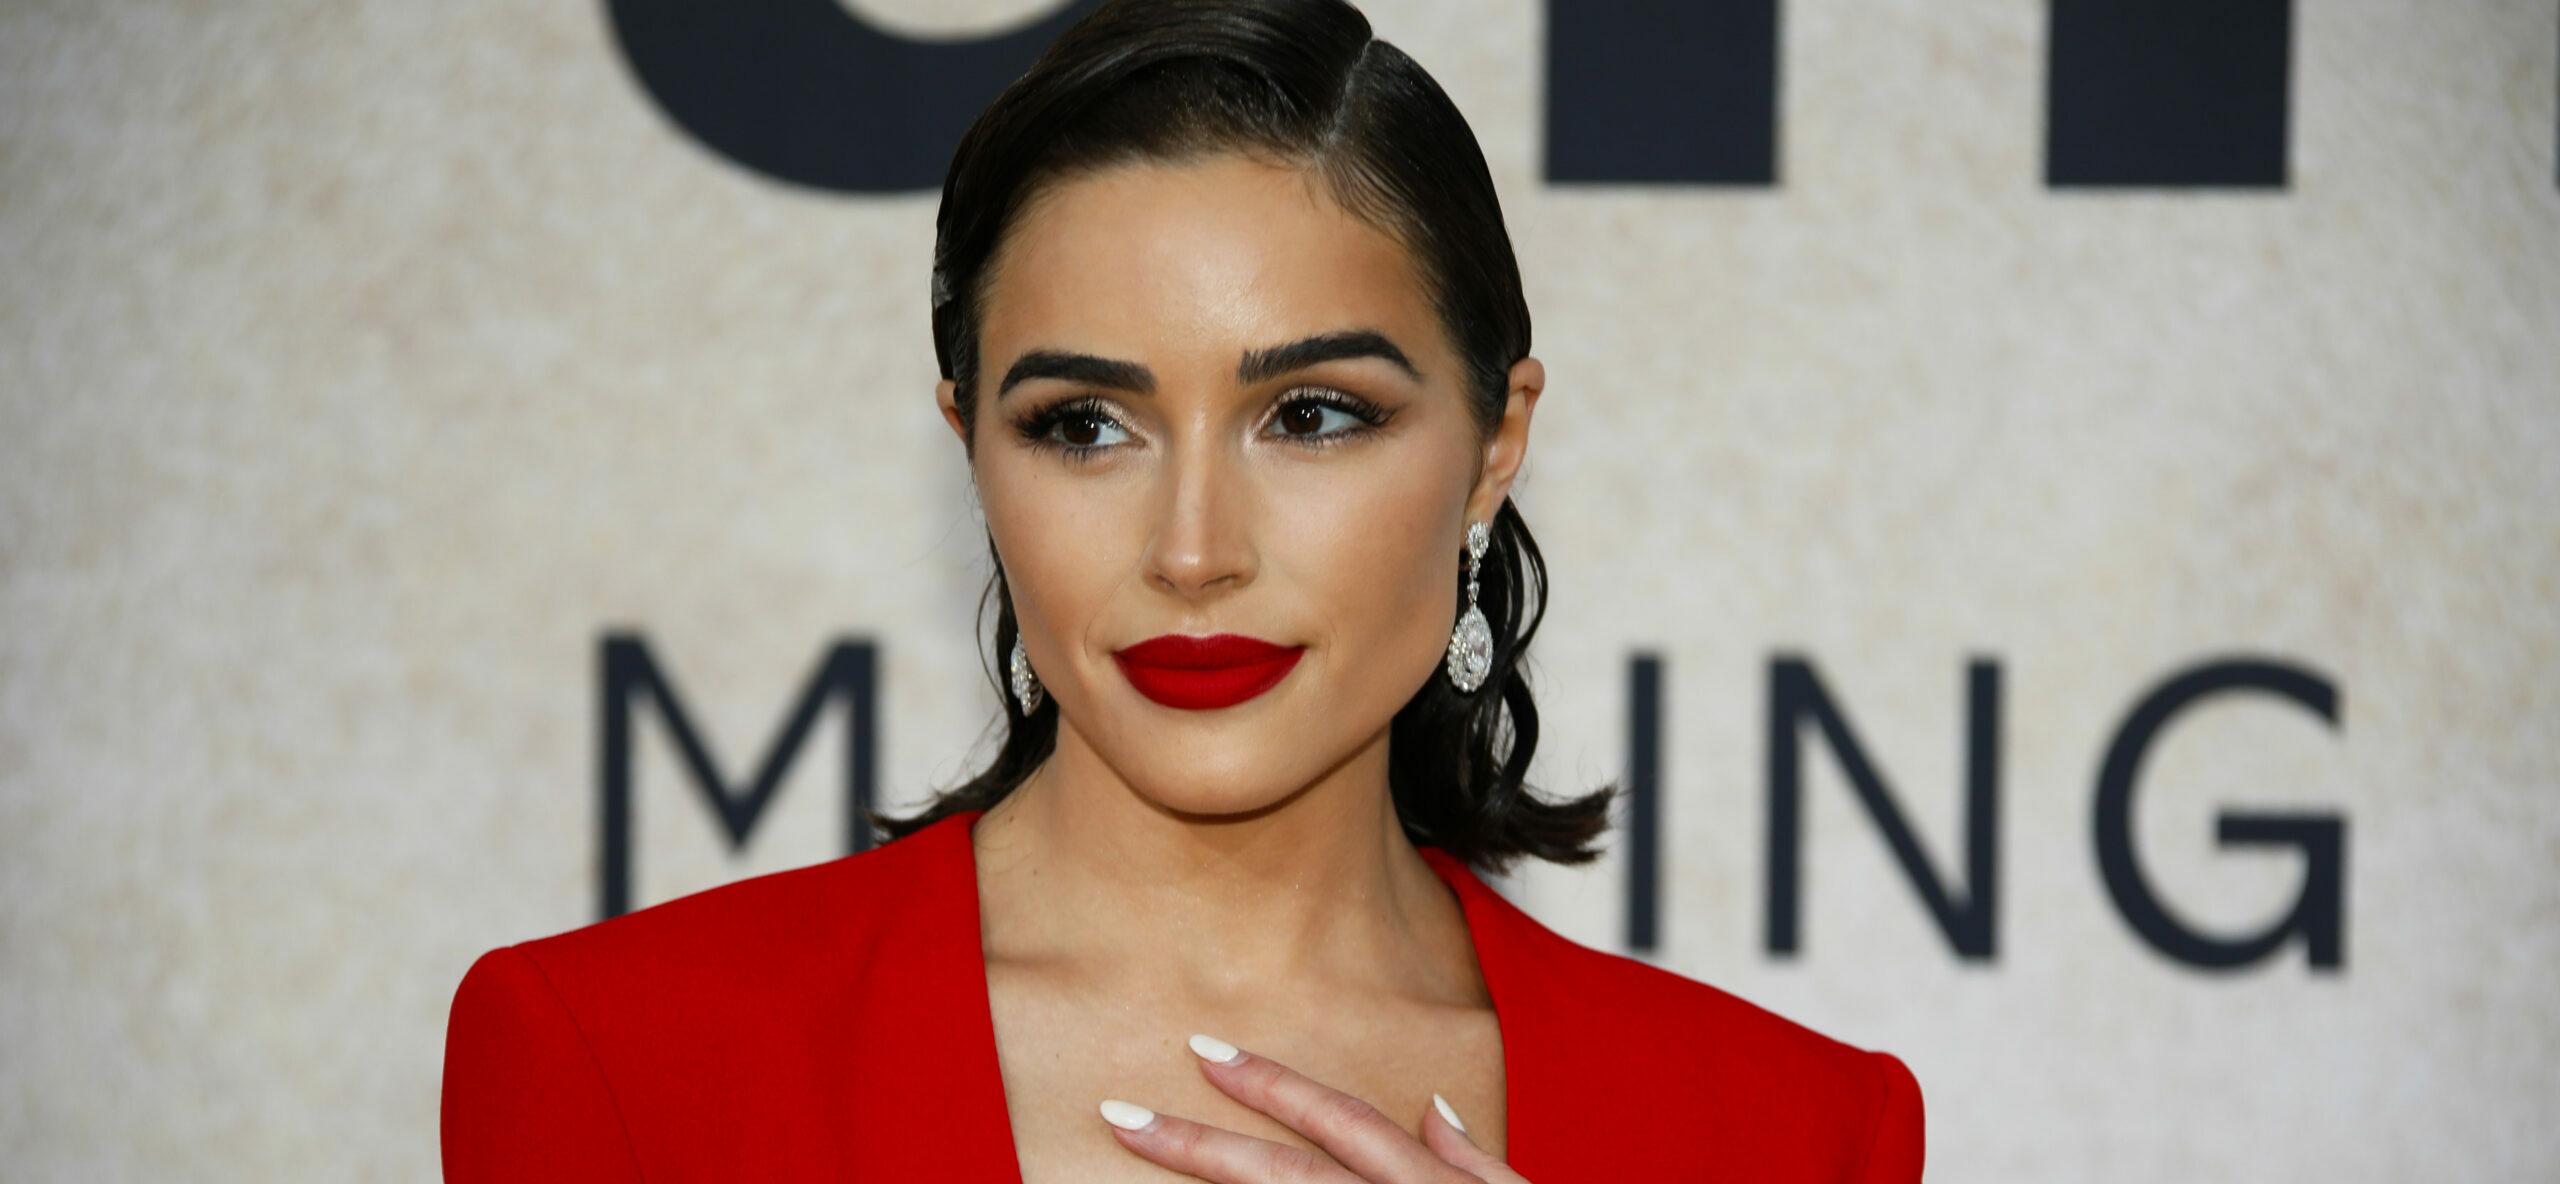 Olivia Culpo Is ‘Body Goals’ In A High-Slit Skirt